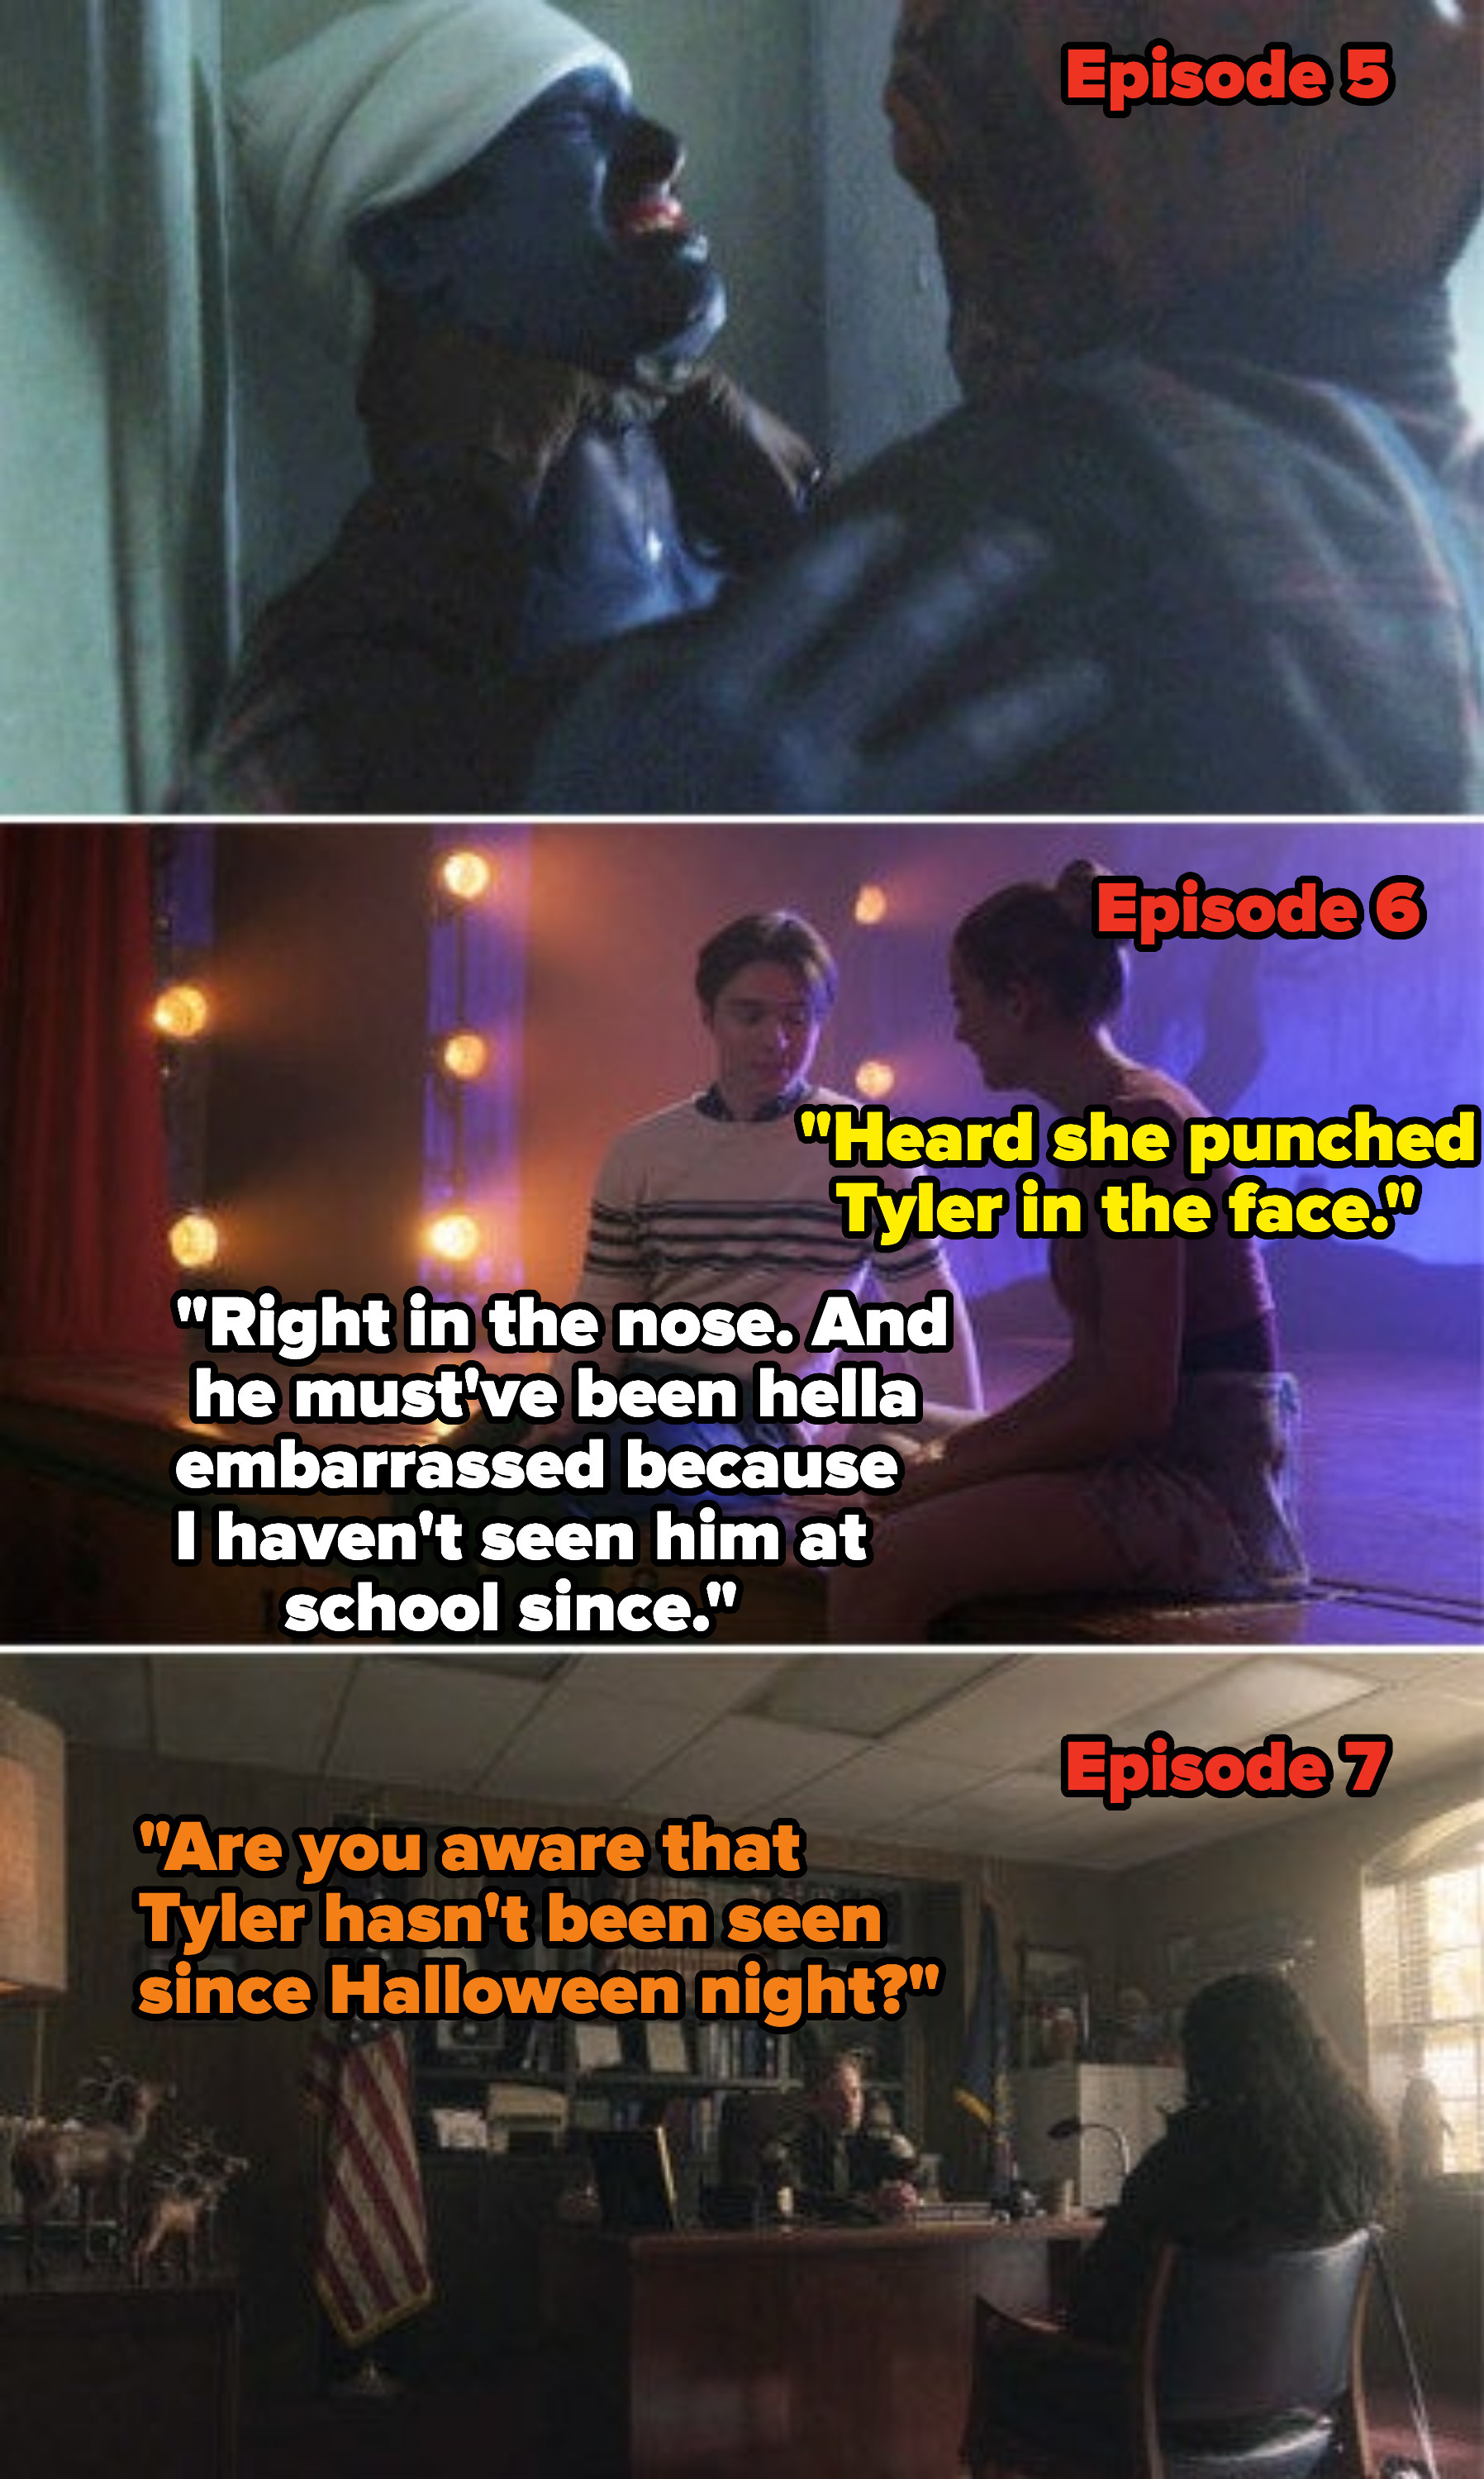 Tyler being killed in Episode 5, students saying in Episode 6 that he was punched in the nose and must&#x27;ve been embarrassed &#x27;cause he hasn&#x27;t been seen since, and in Episode 7 someone saying &quot;Are you aware that Tyler hasn&#x27;t been seen since Halloween night?&quot;